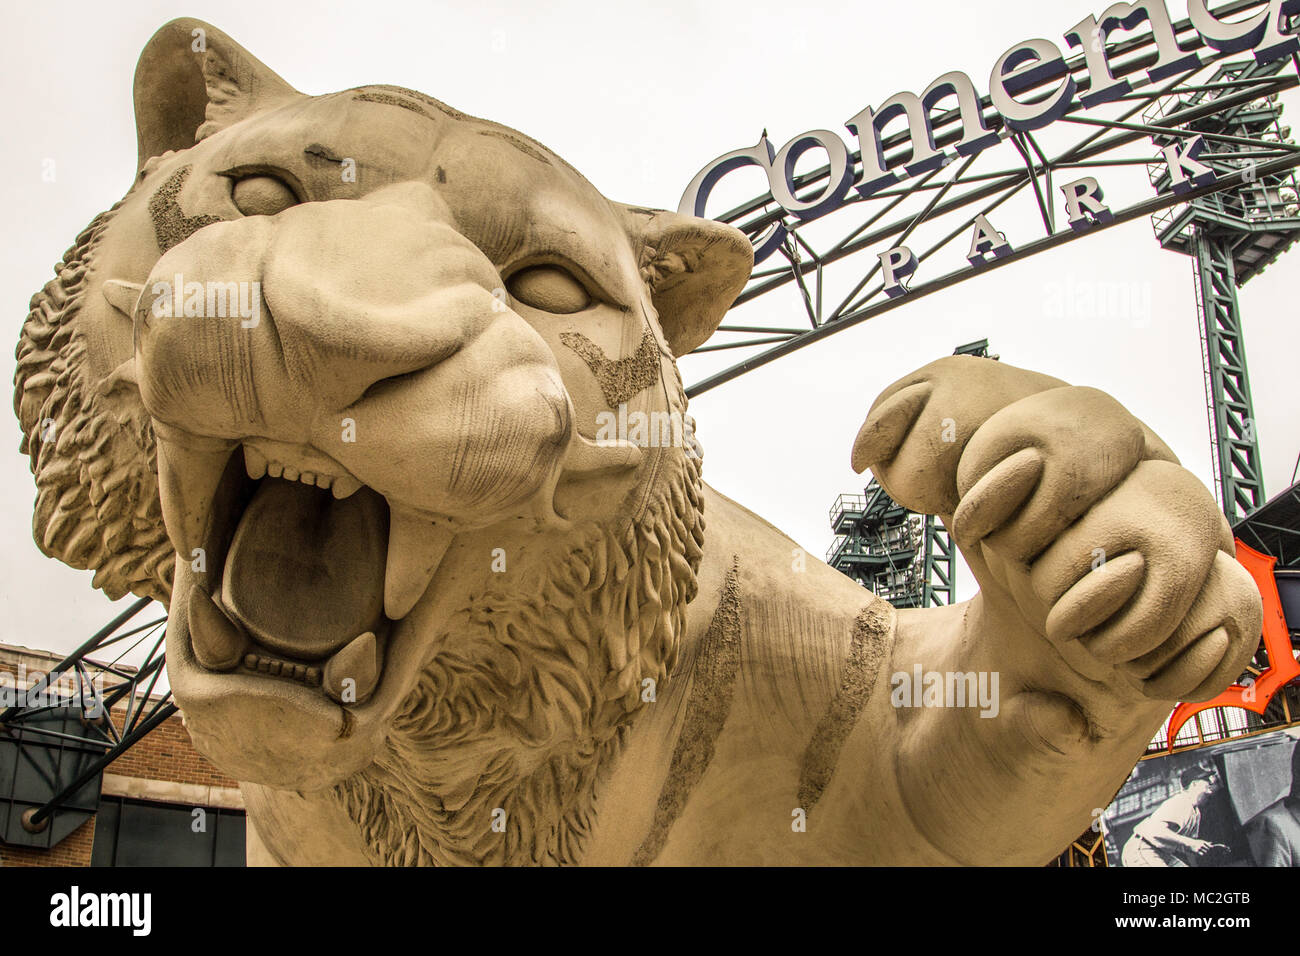 Detroit, Michigan, USA - August 30, 2020: Tiger Statue At The